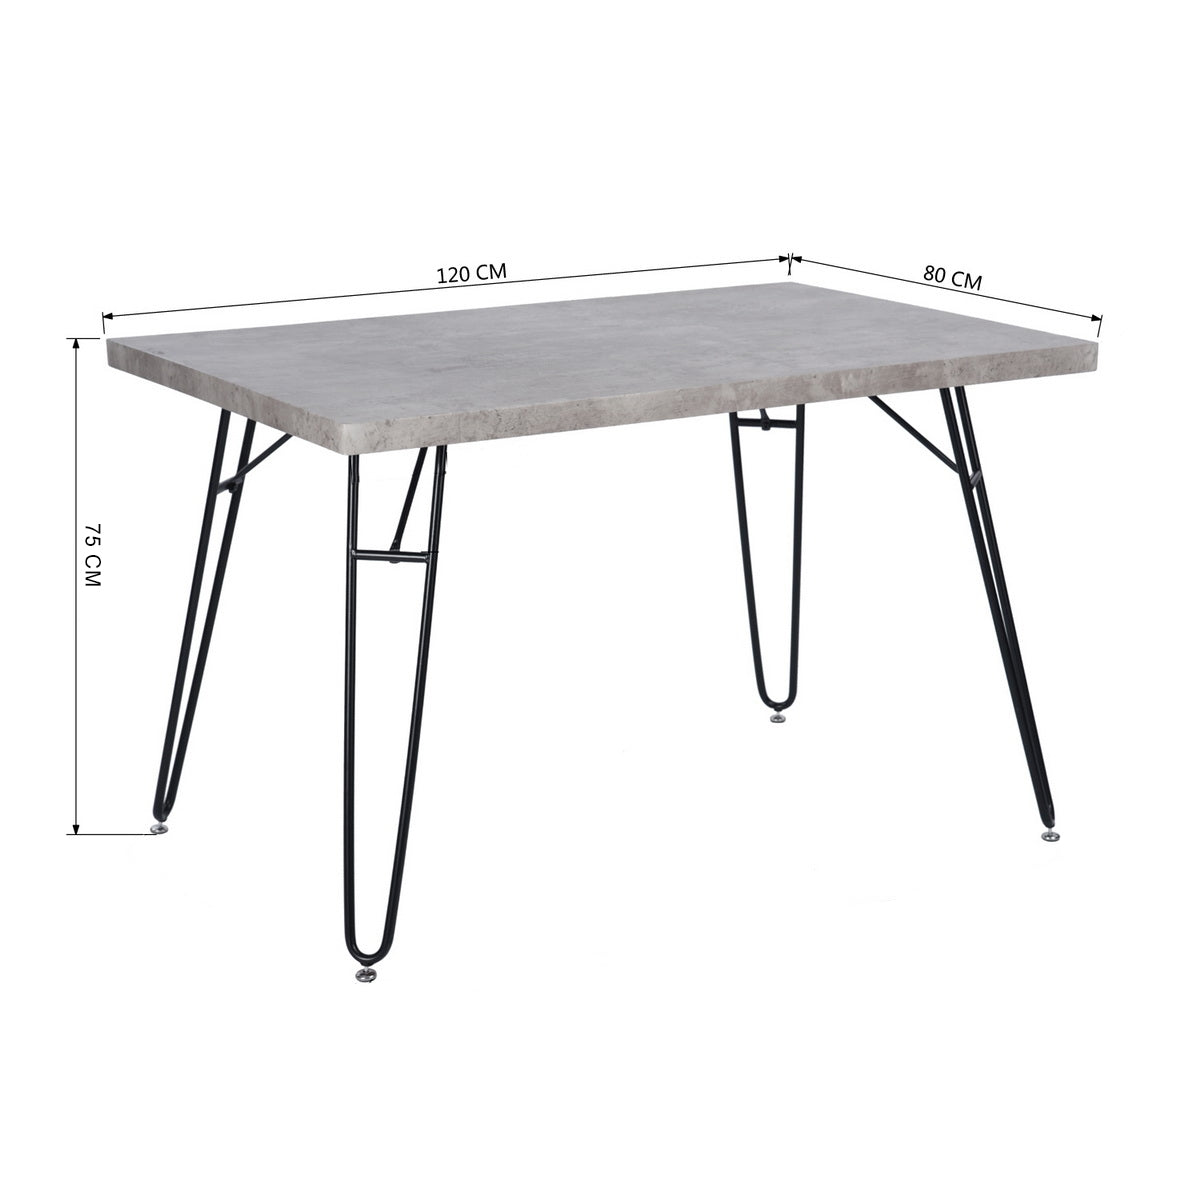 RaDEWAY Kitchen Table for 4 People